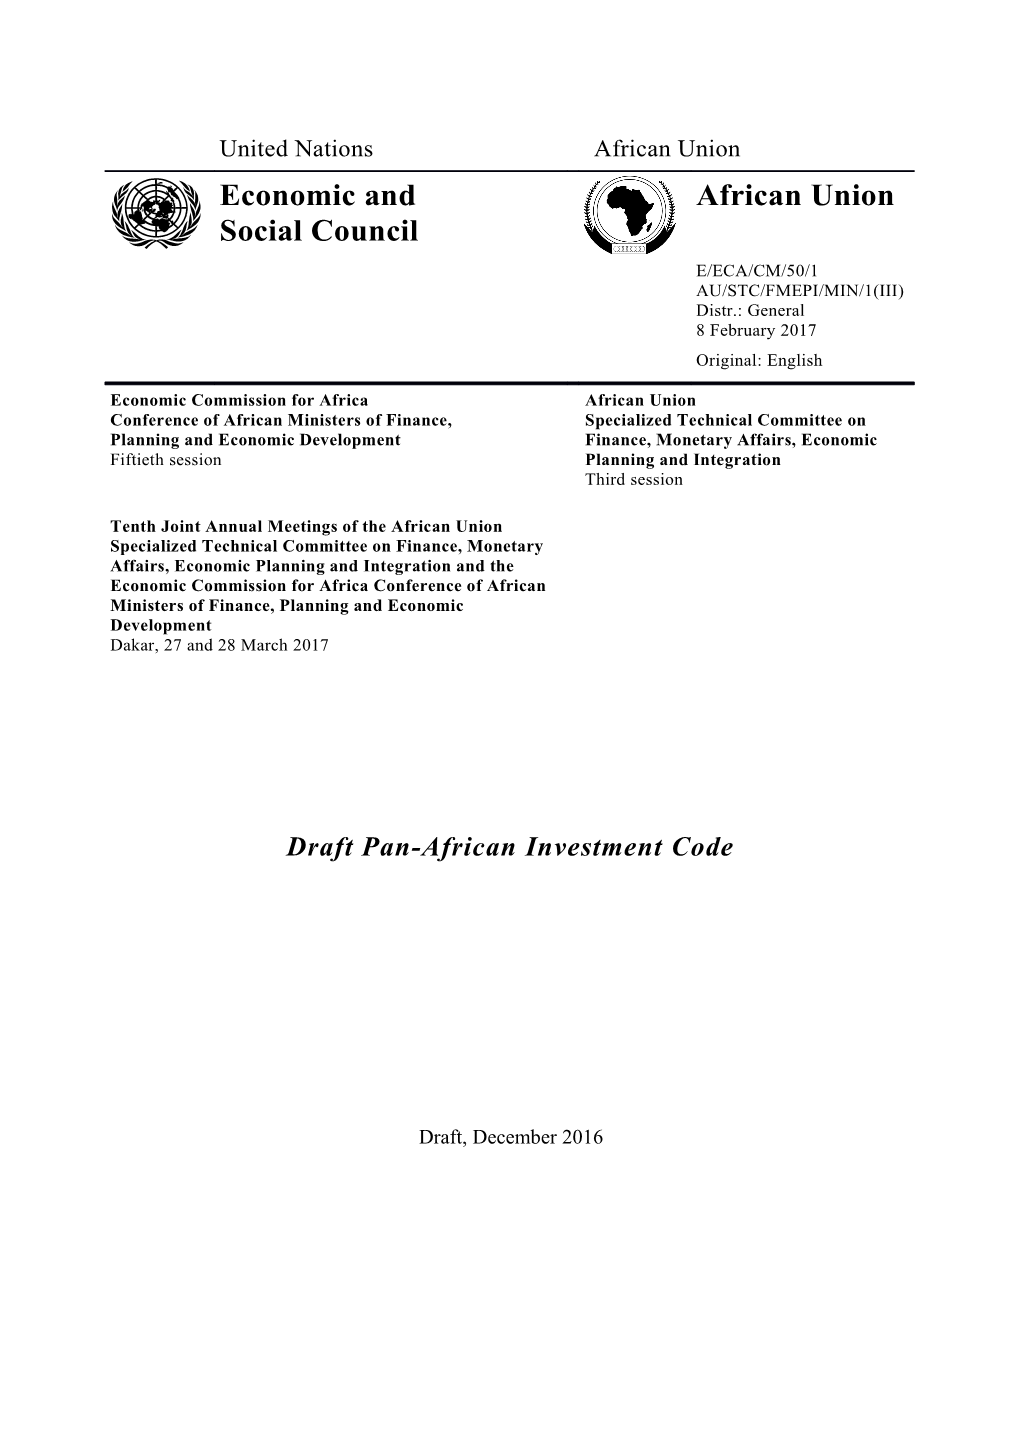 Draft Pan-African Investment Code